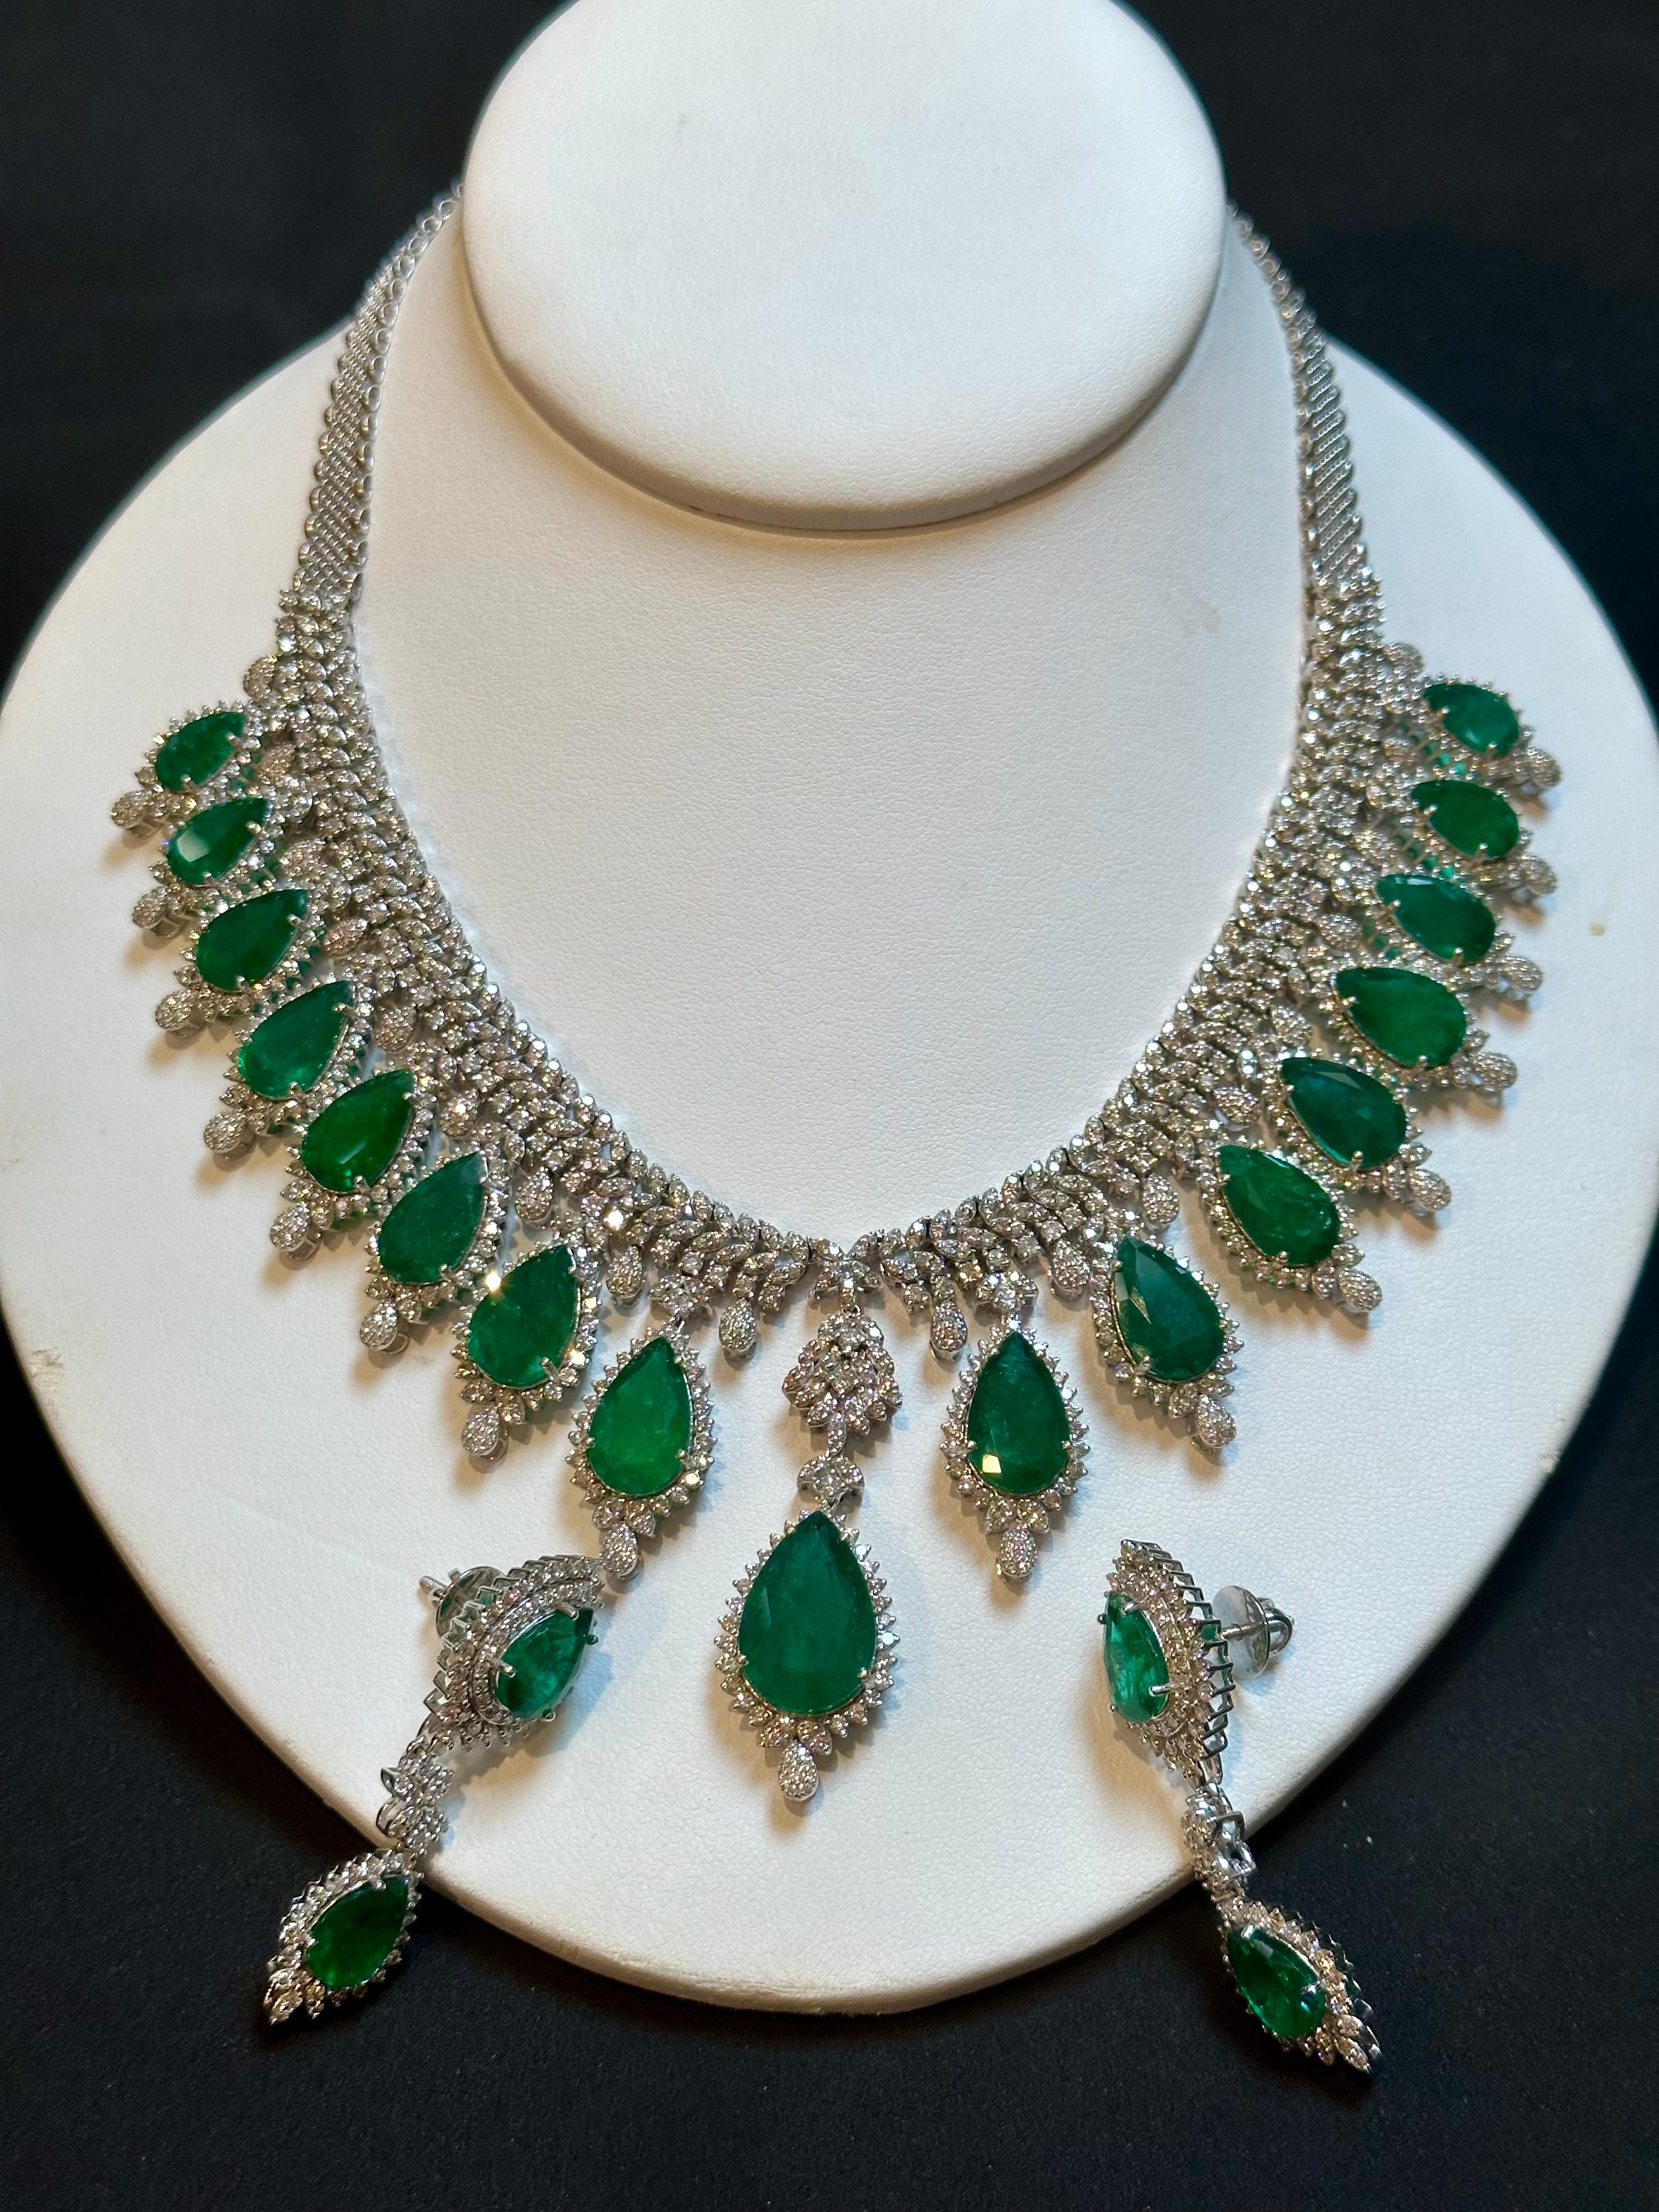 73ct Zambian Emerald and 22ct Diamond Necklace and Earring Bridal Suite For Sale 2